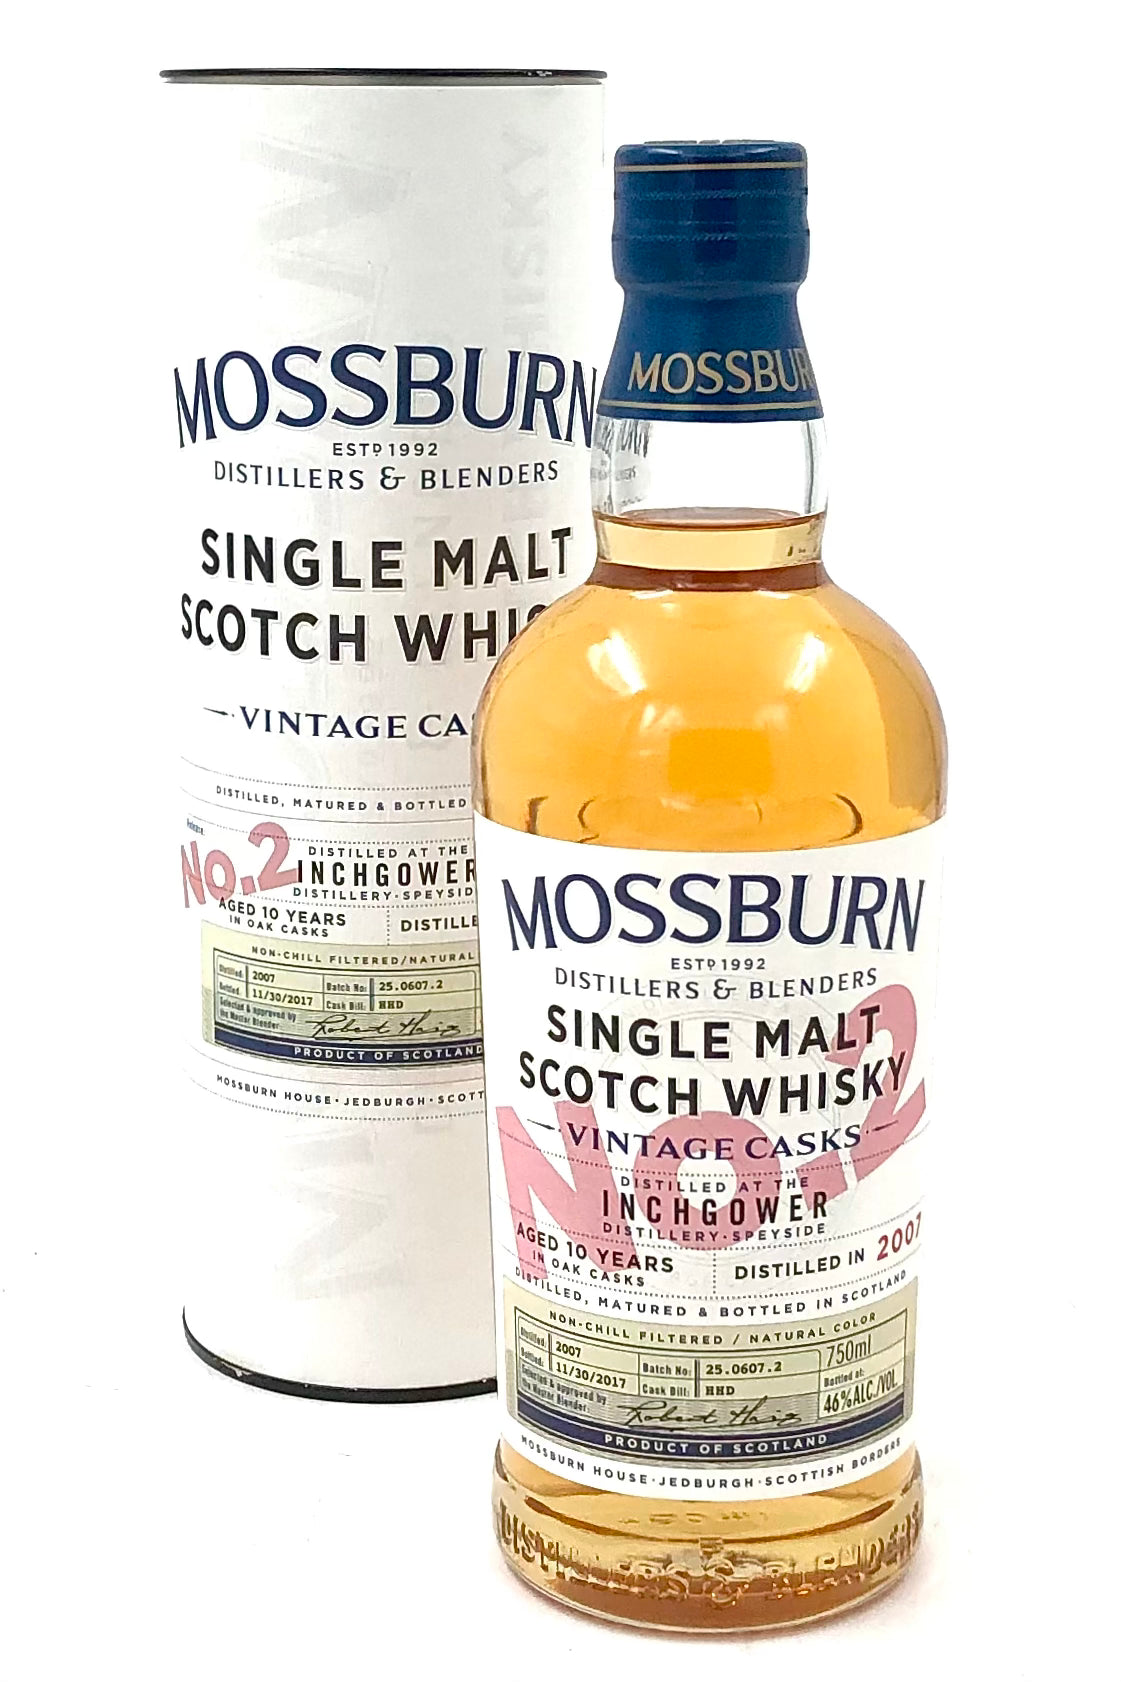 Inchtower 10 Years Old No. 2 Scotch Whisky by Mossburn Distillers